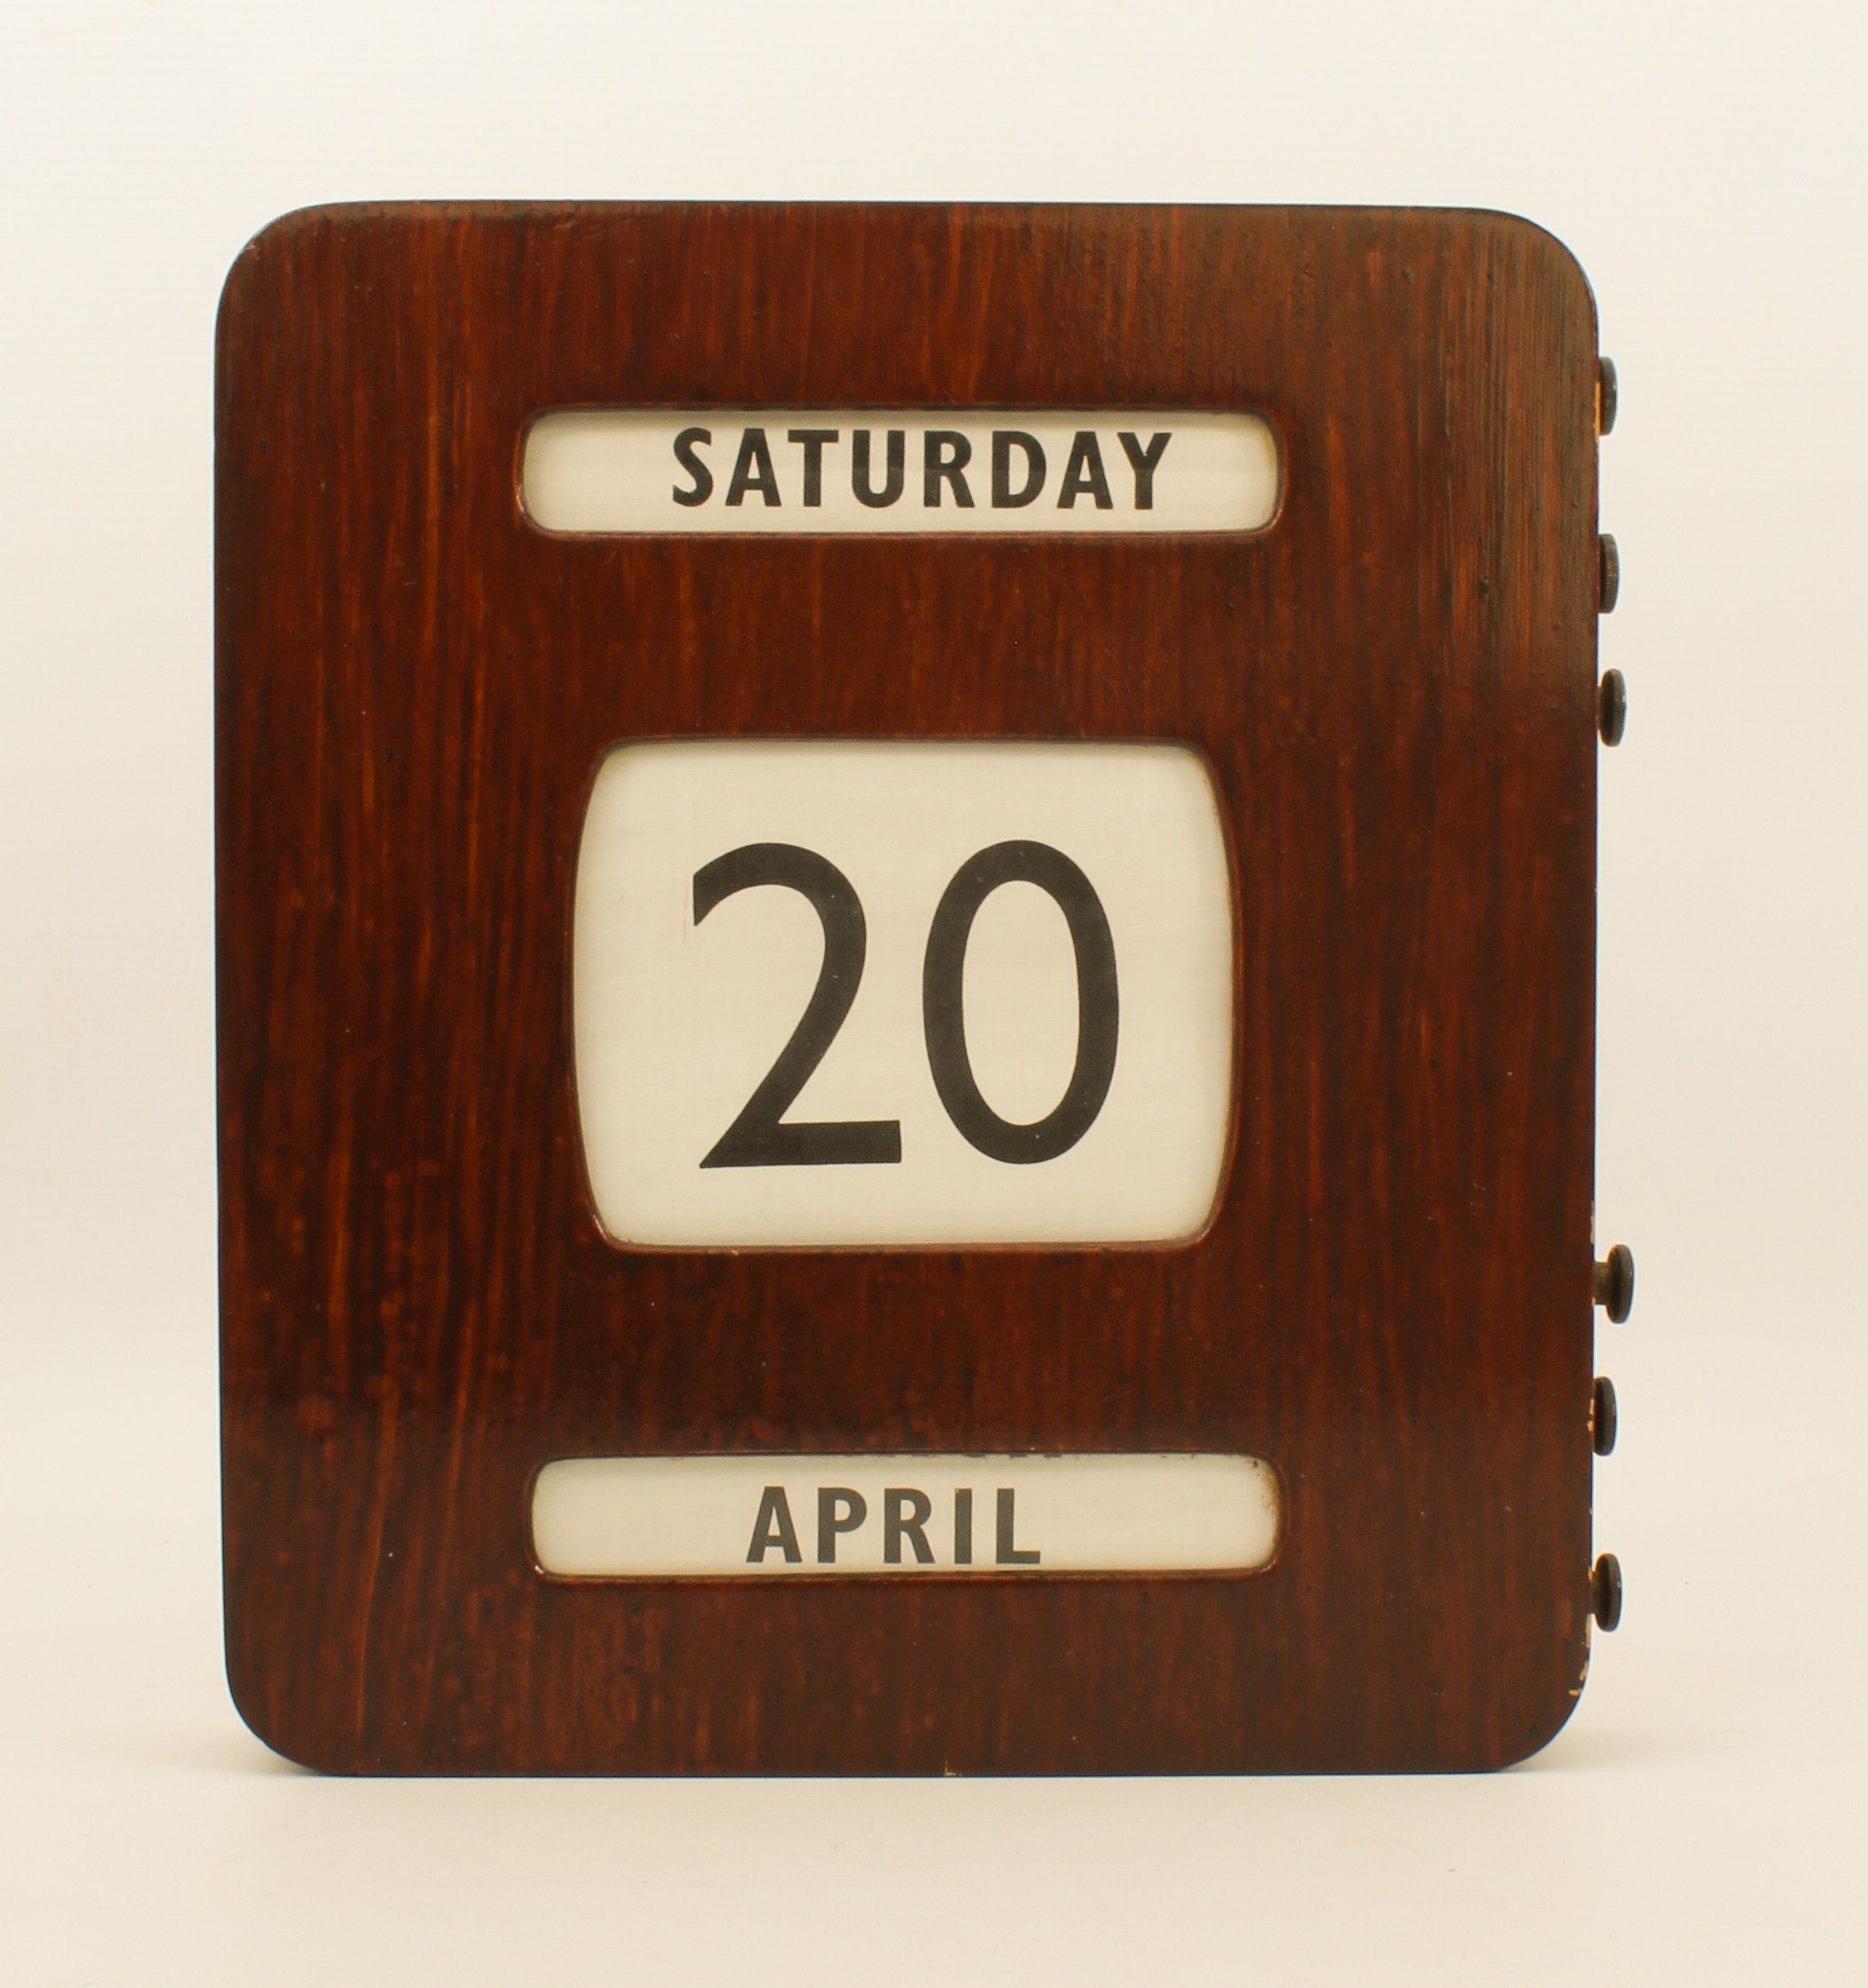 A mid-20th century wall-hanging perpetual calendar - in a stained plywood case with brass button-